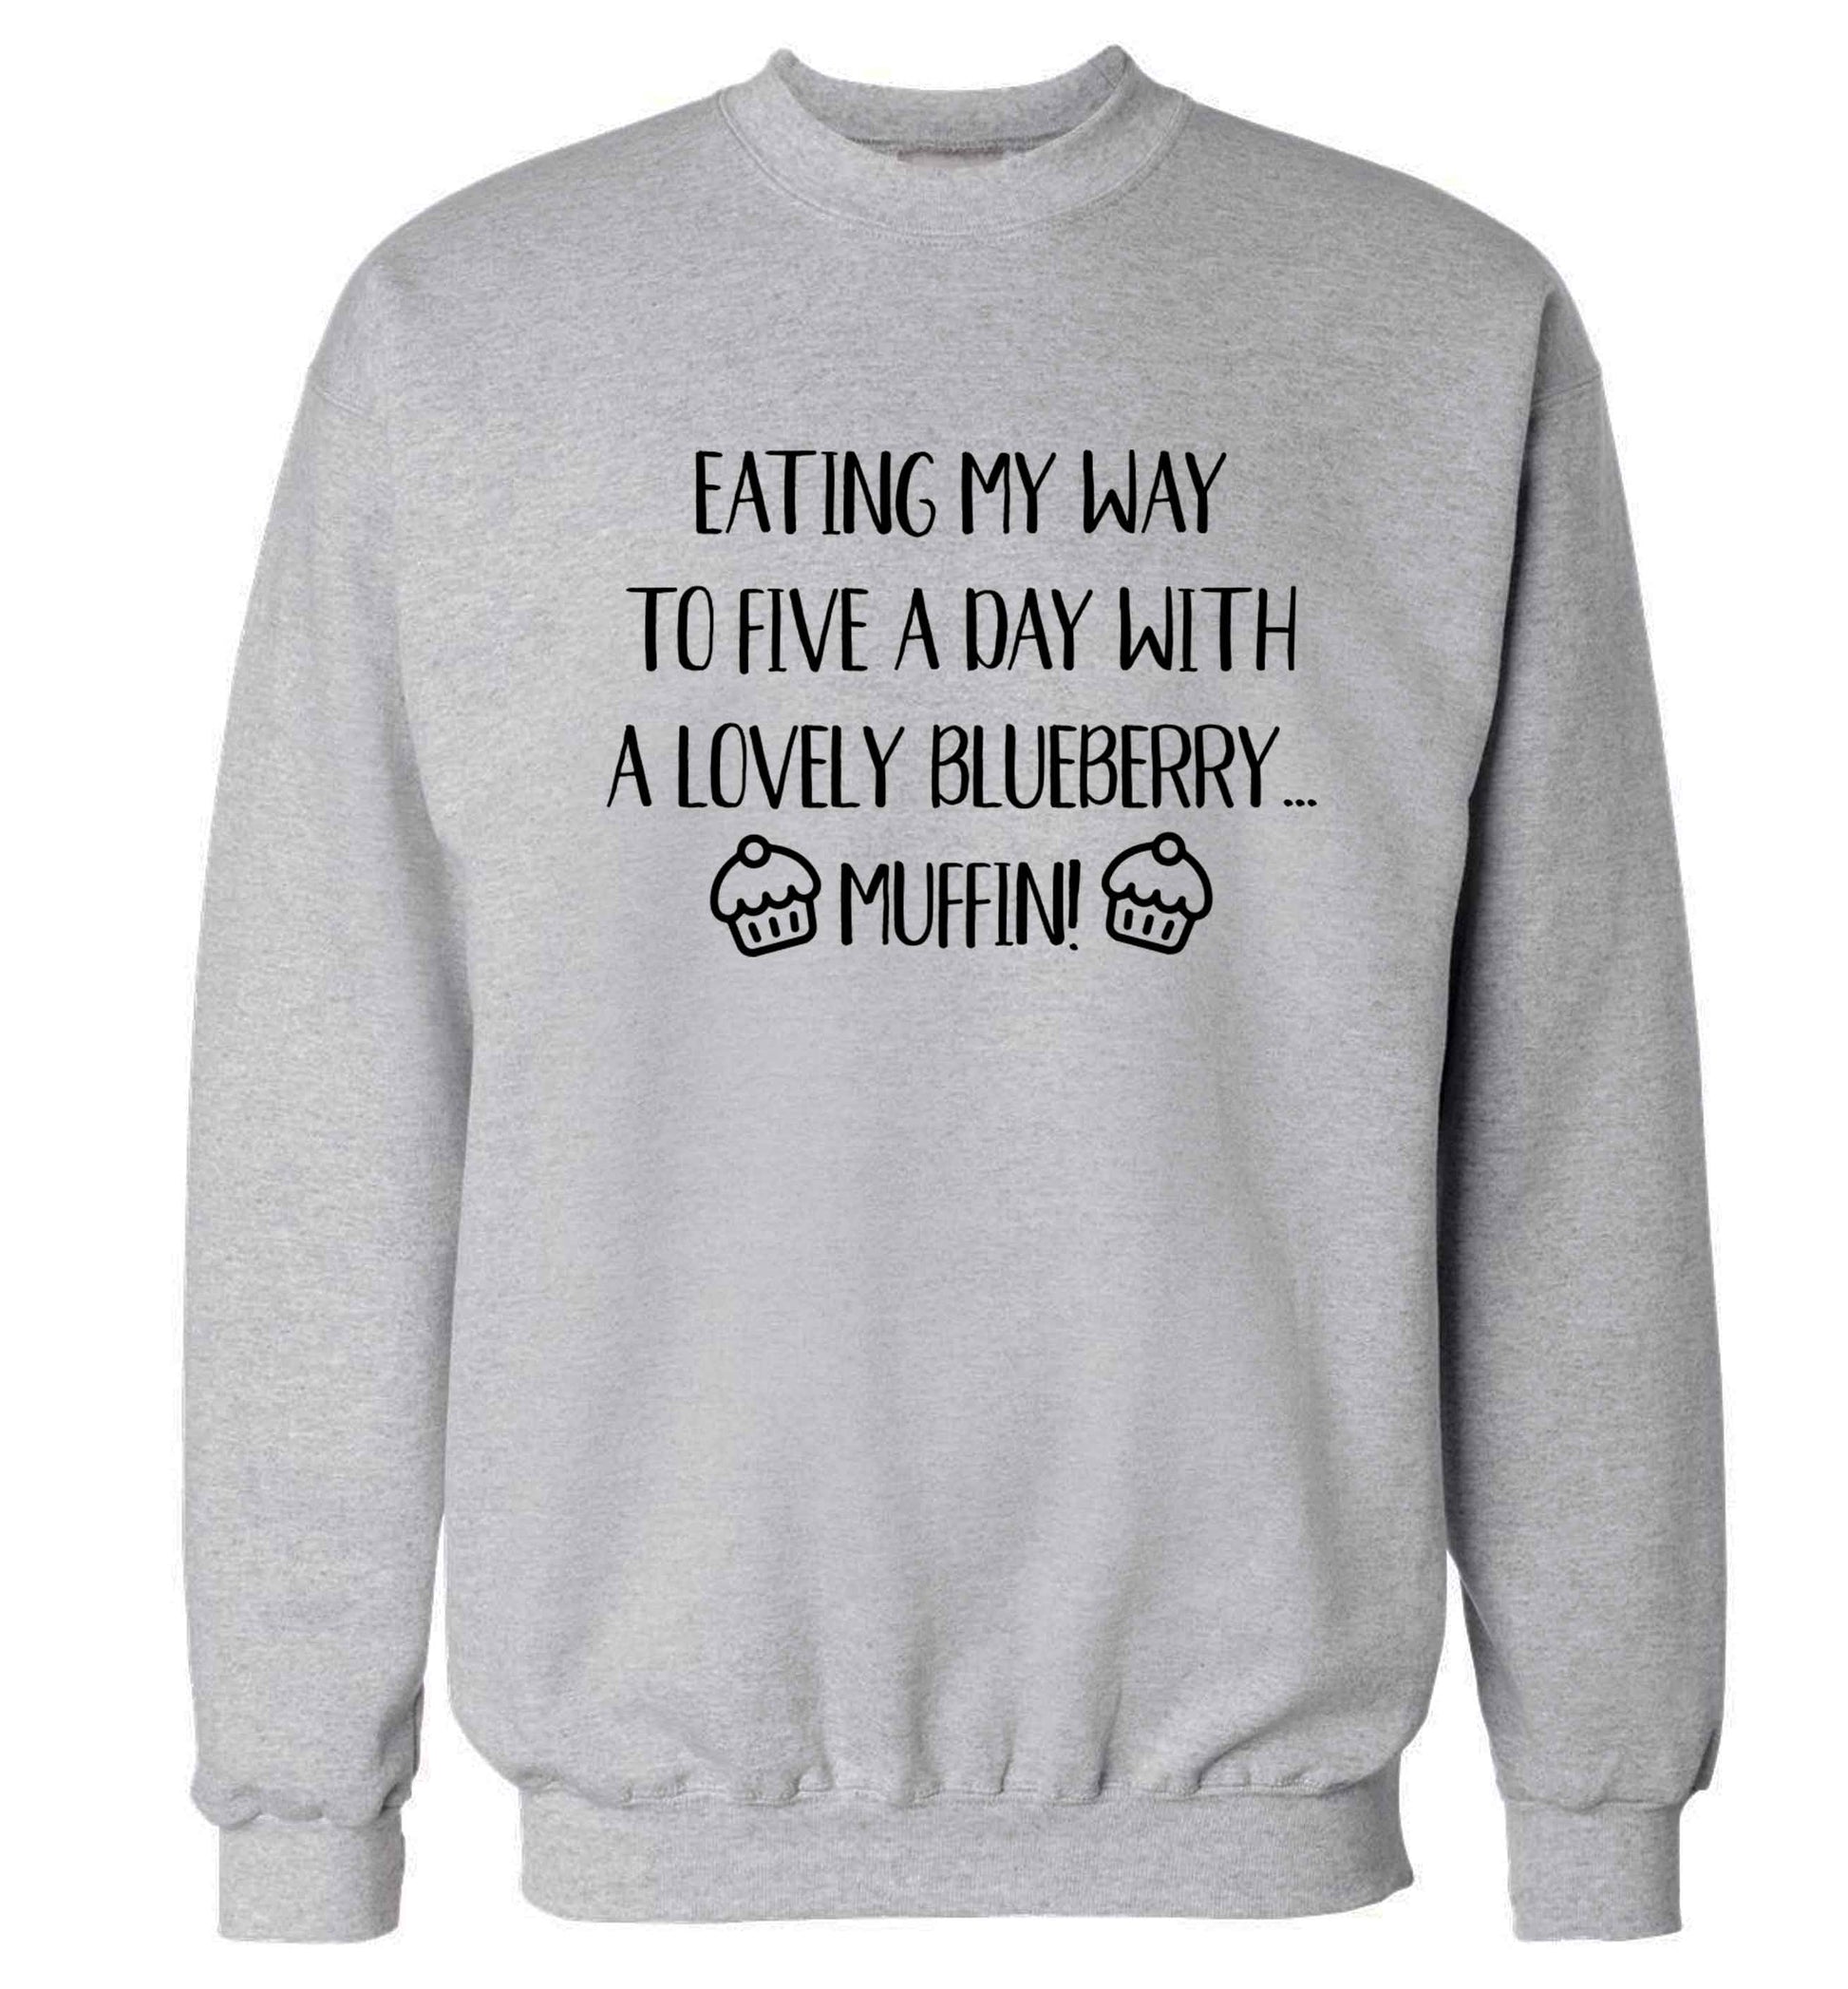 Eating my way to five a day with a lovely blueberry muffin Adult's unisex grey Sweater 2XL